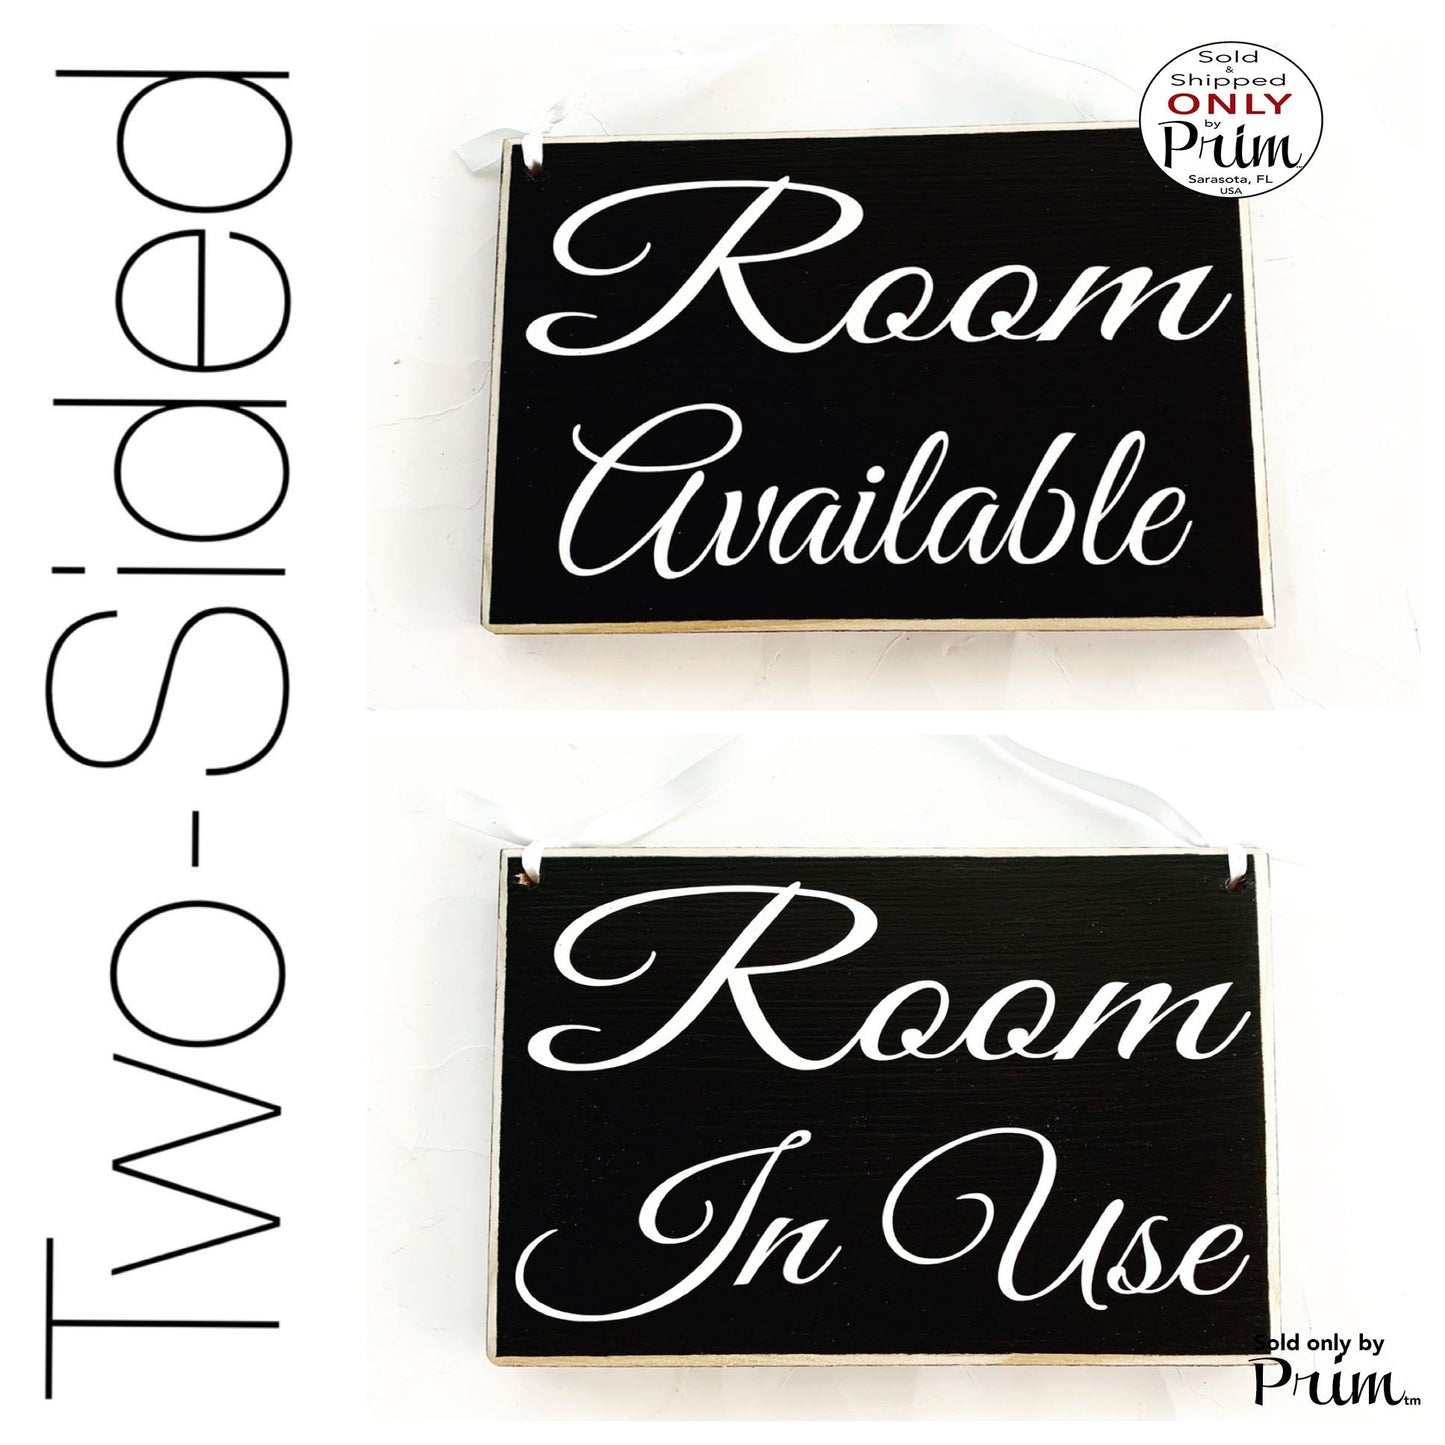 Two Sided 8x6 Room Available In Use Welcome In Session Please Do Not Disturb Not Enter Private Patient Spa Salon Office Door Hanger Plaque